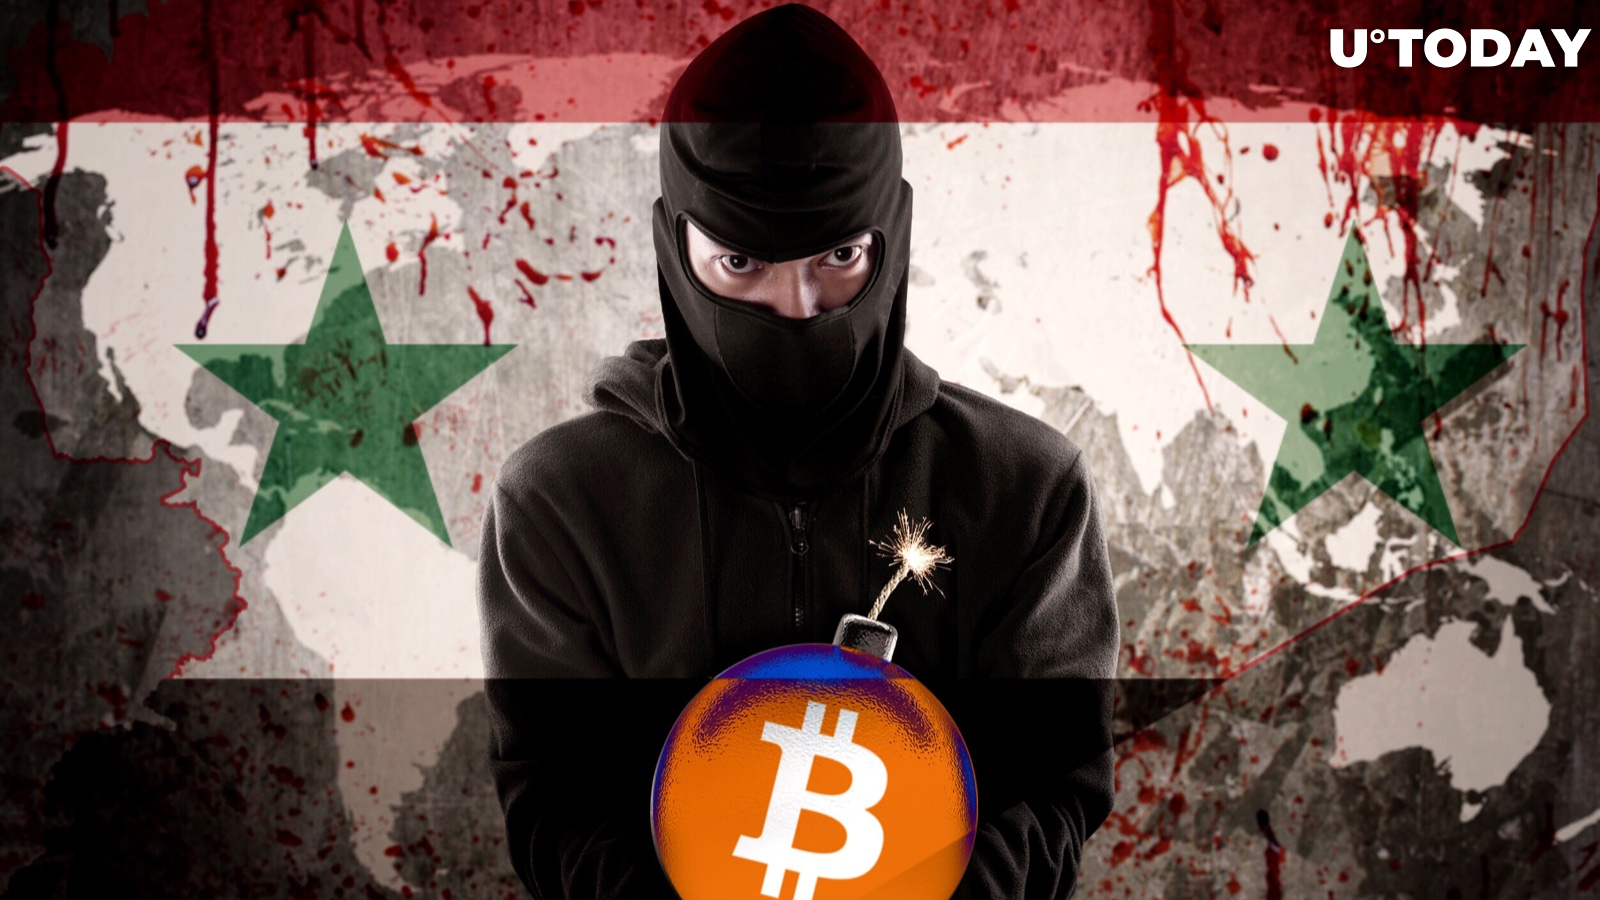 Islamic Extremists Call Bitcoin One of the Most Important Inventions